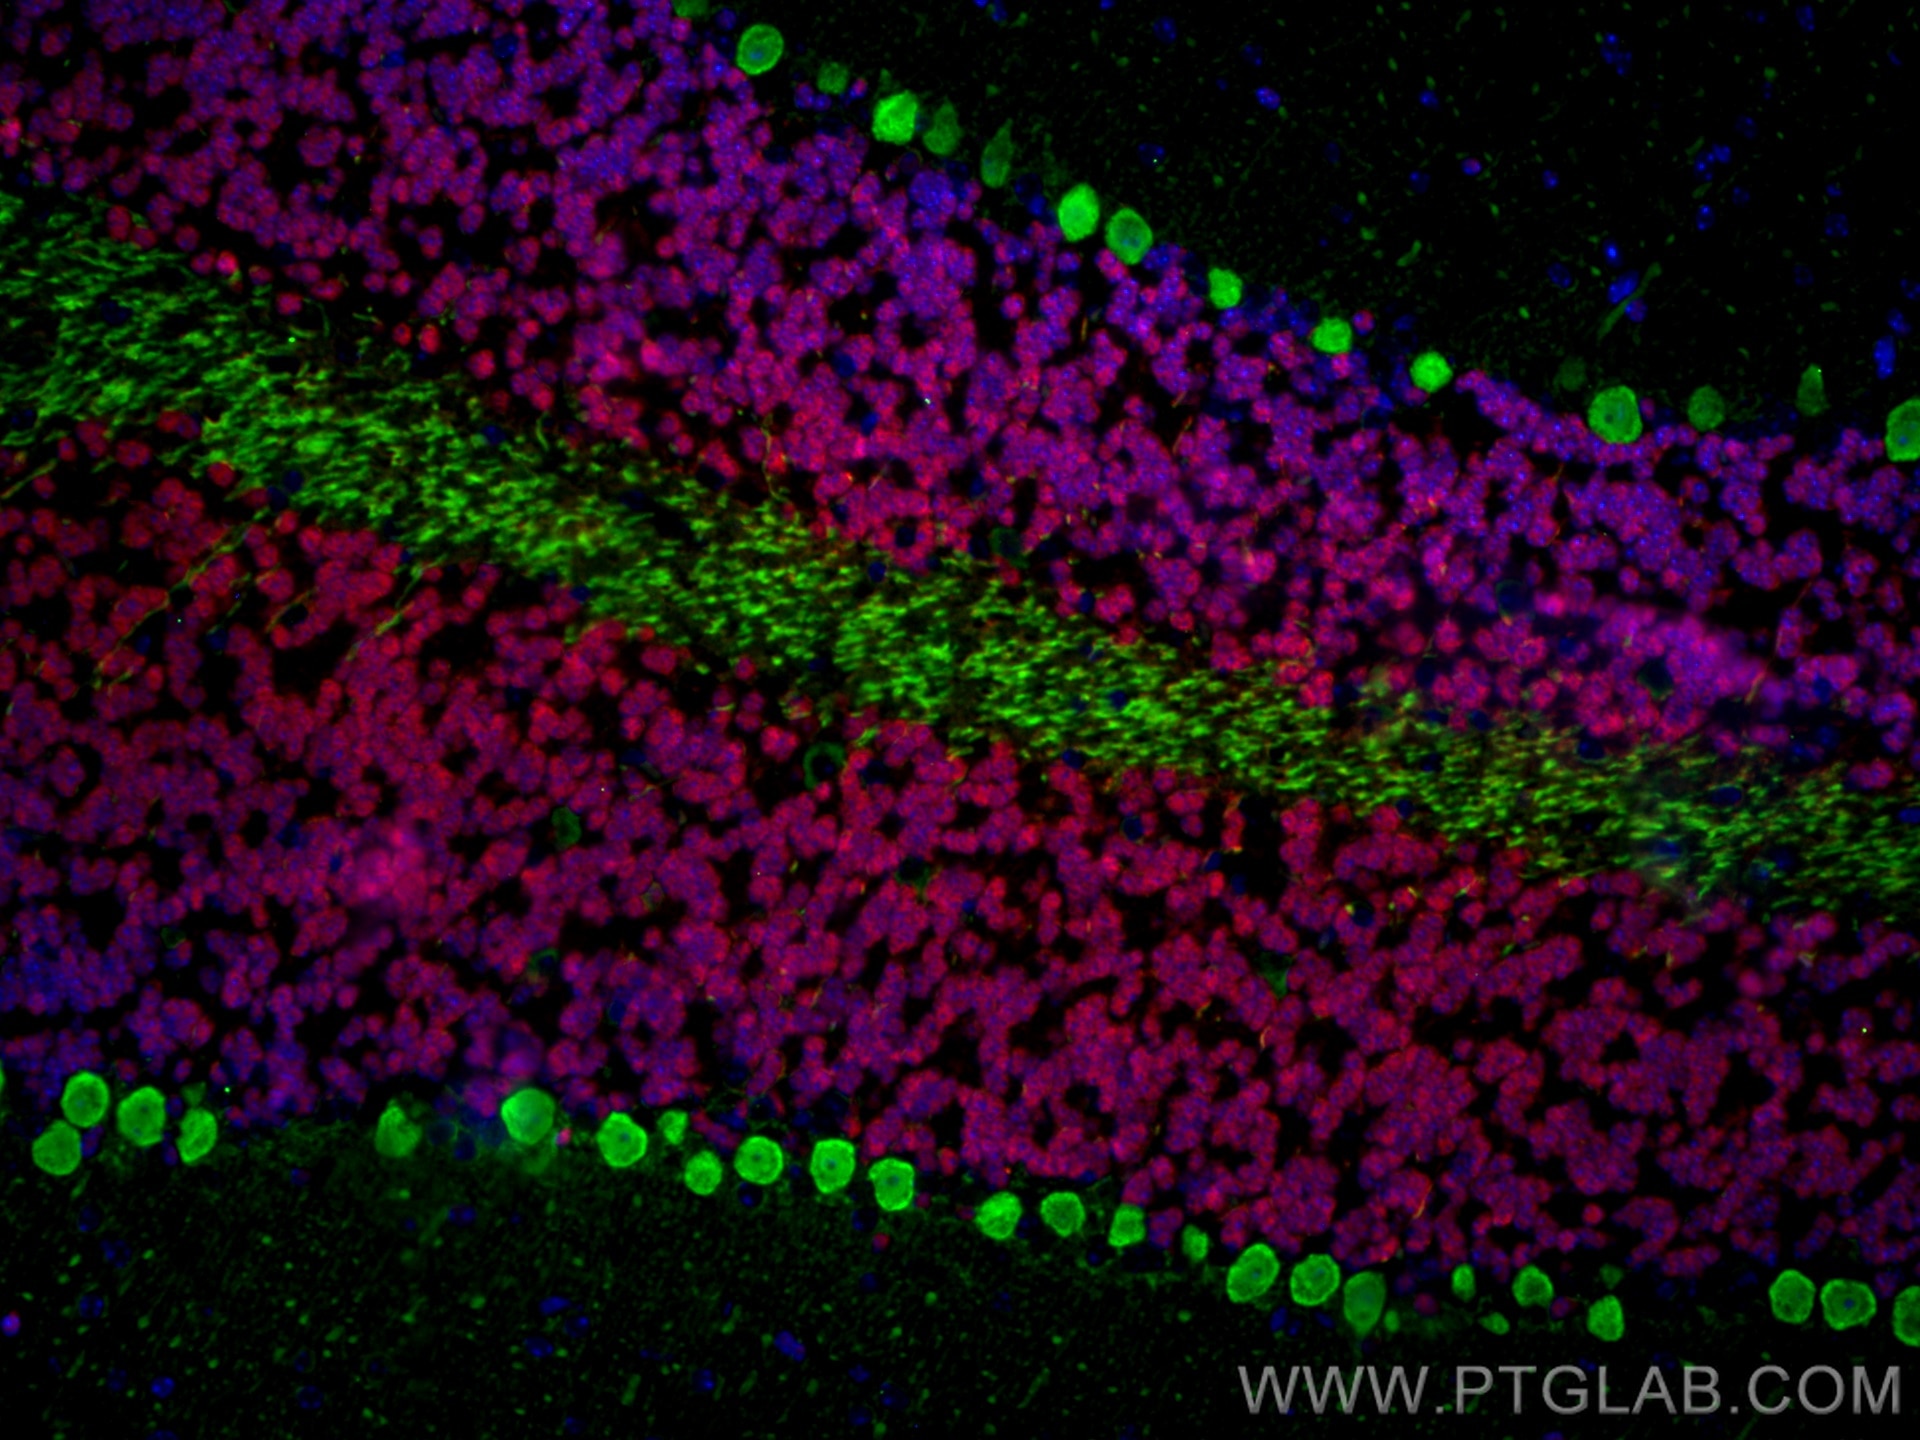 Immunofluorescence (IF) analysis of mouse cerebellum FFPE tissue stained with rabbit anti-NeuN polyclonal antibody (26975-1-AP, red) and mouse anti-Calbindin-D28k monoclonal antibody (66394-1-Ig, green). Multi-rAb CoraLite® Plus 594-Goat Anti-Rabbit Secondary Antibody (H+L) (RGAM004, 1:500) and Multi-rAb CoraLite® Plus 647-Goat Anti-Mouse Recombinant Secondary Antibody (H+L) (RGAM002, 1:500) were used for detection.  